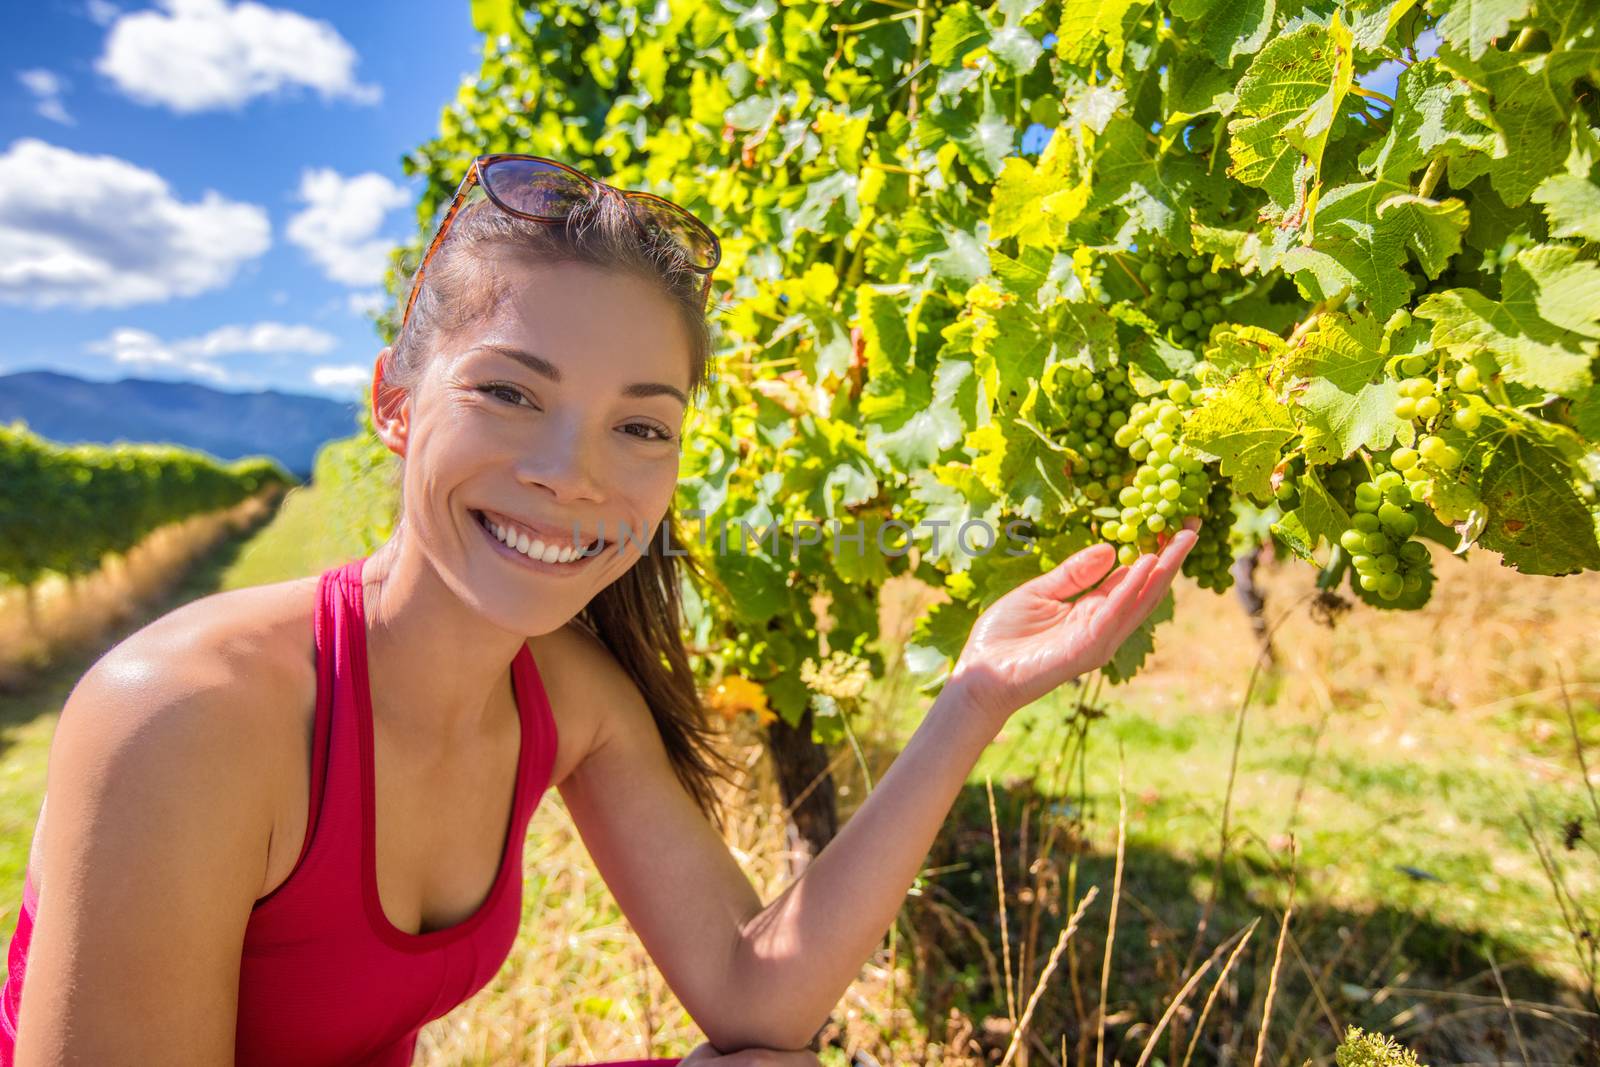 Vineyard winery tourist woman grape picking. Harvest farming to make white wine. Asian girl hand showing holding bunch of green grapes on grapevine. Woman in Marlborough region, New Zealand. by Maridav